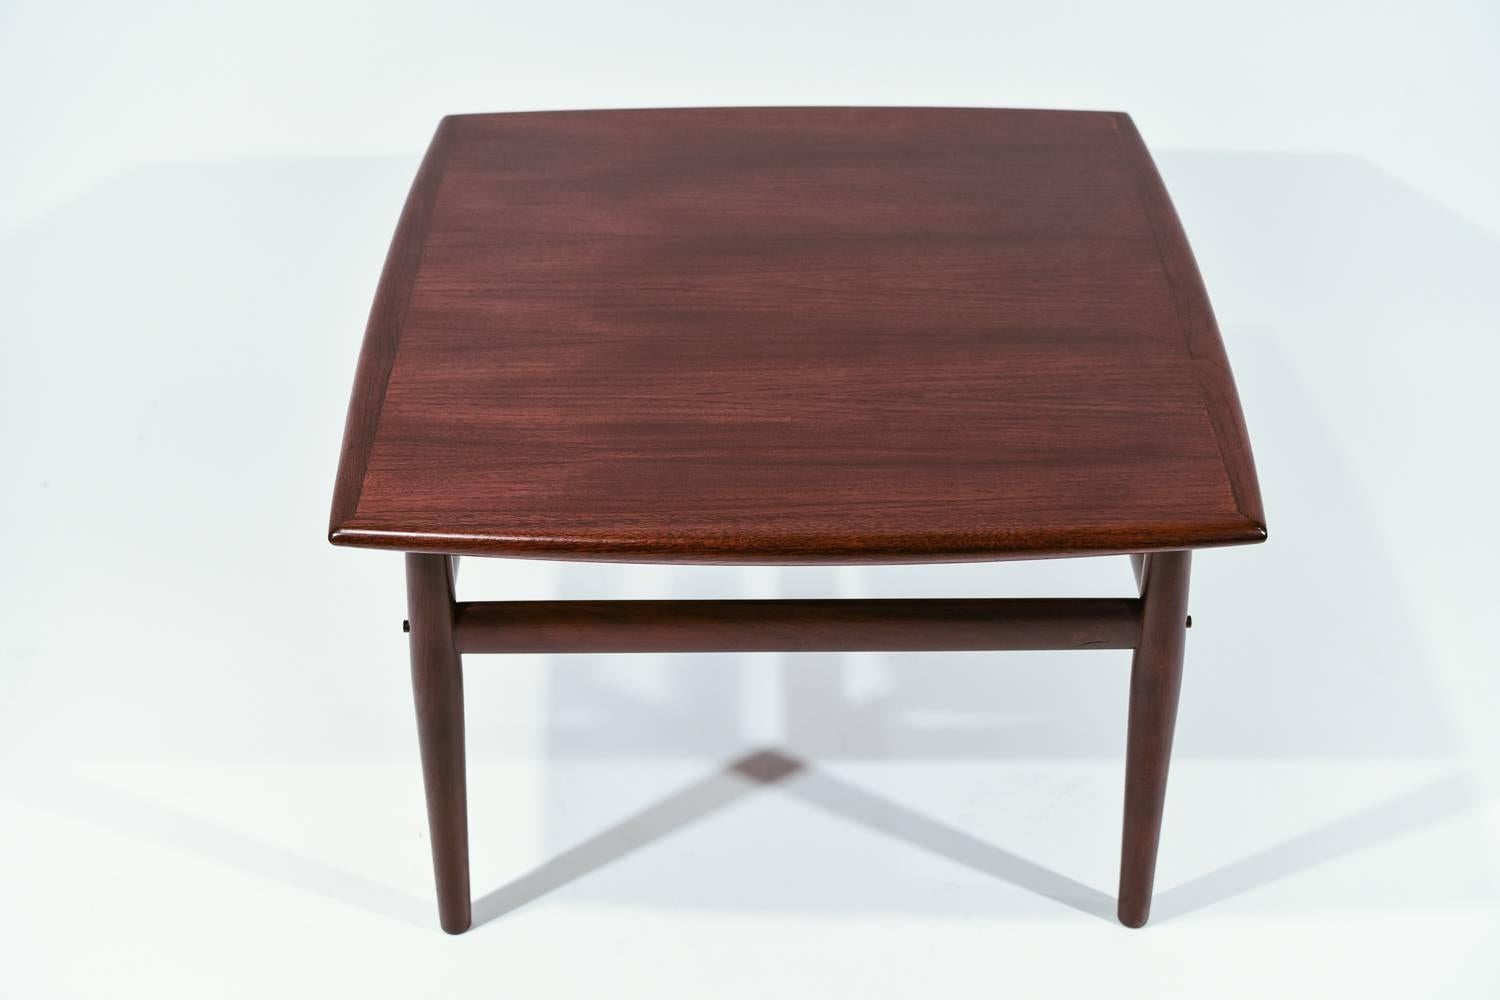 This Danish Mid-Century coffee table was designed by Grete Jalk for Glostrup in the 1960s. Featuring exquisite rosewood, typically used in Danish design.